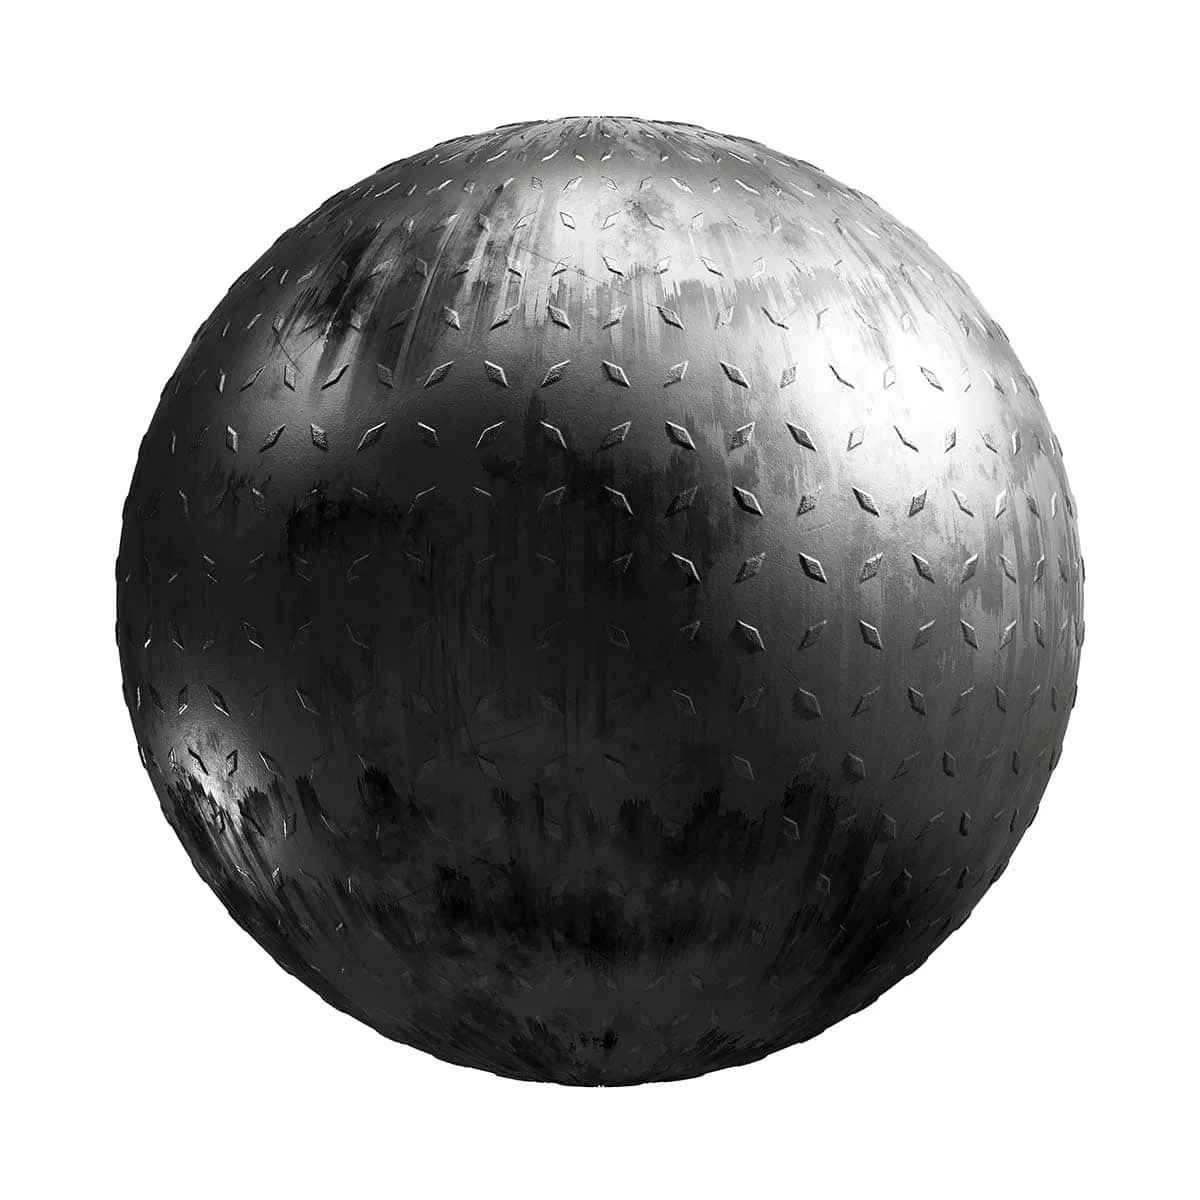 PBR Textures Volume 26 – Metals – 4K – 8K – stained_patterned_metal_26_26